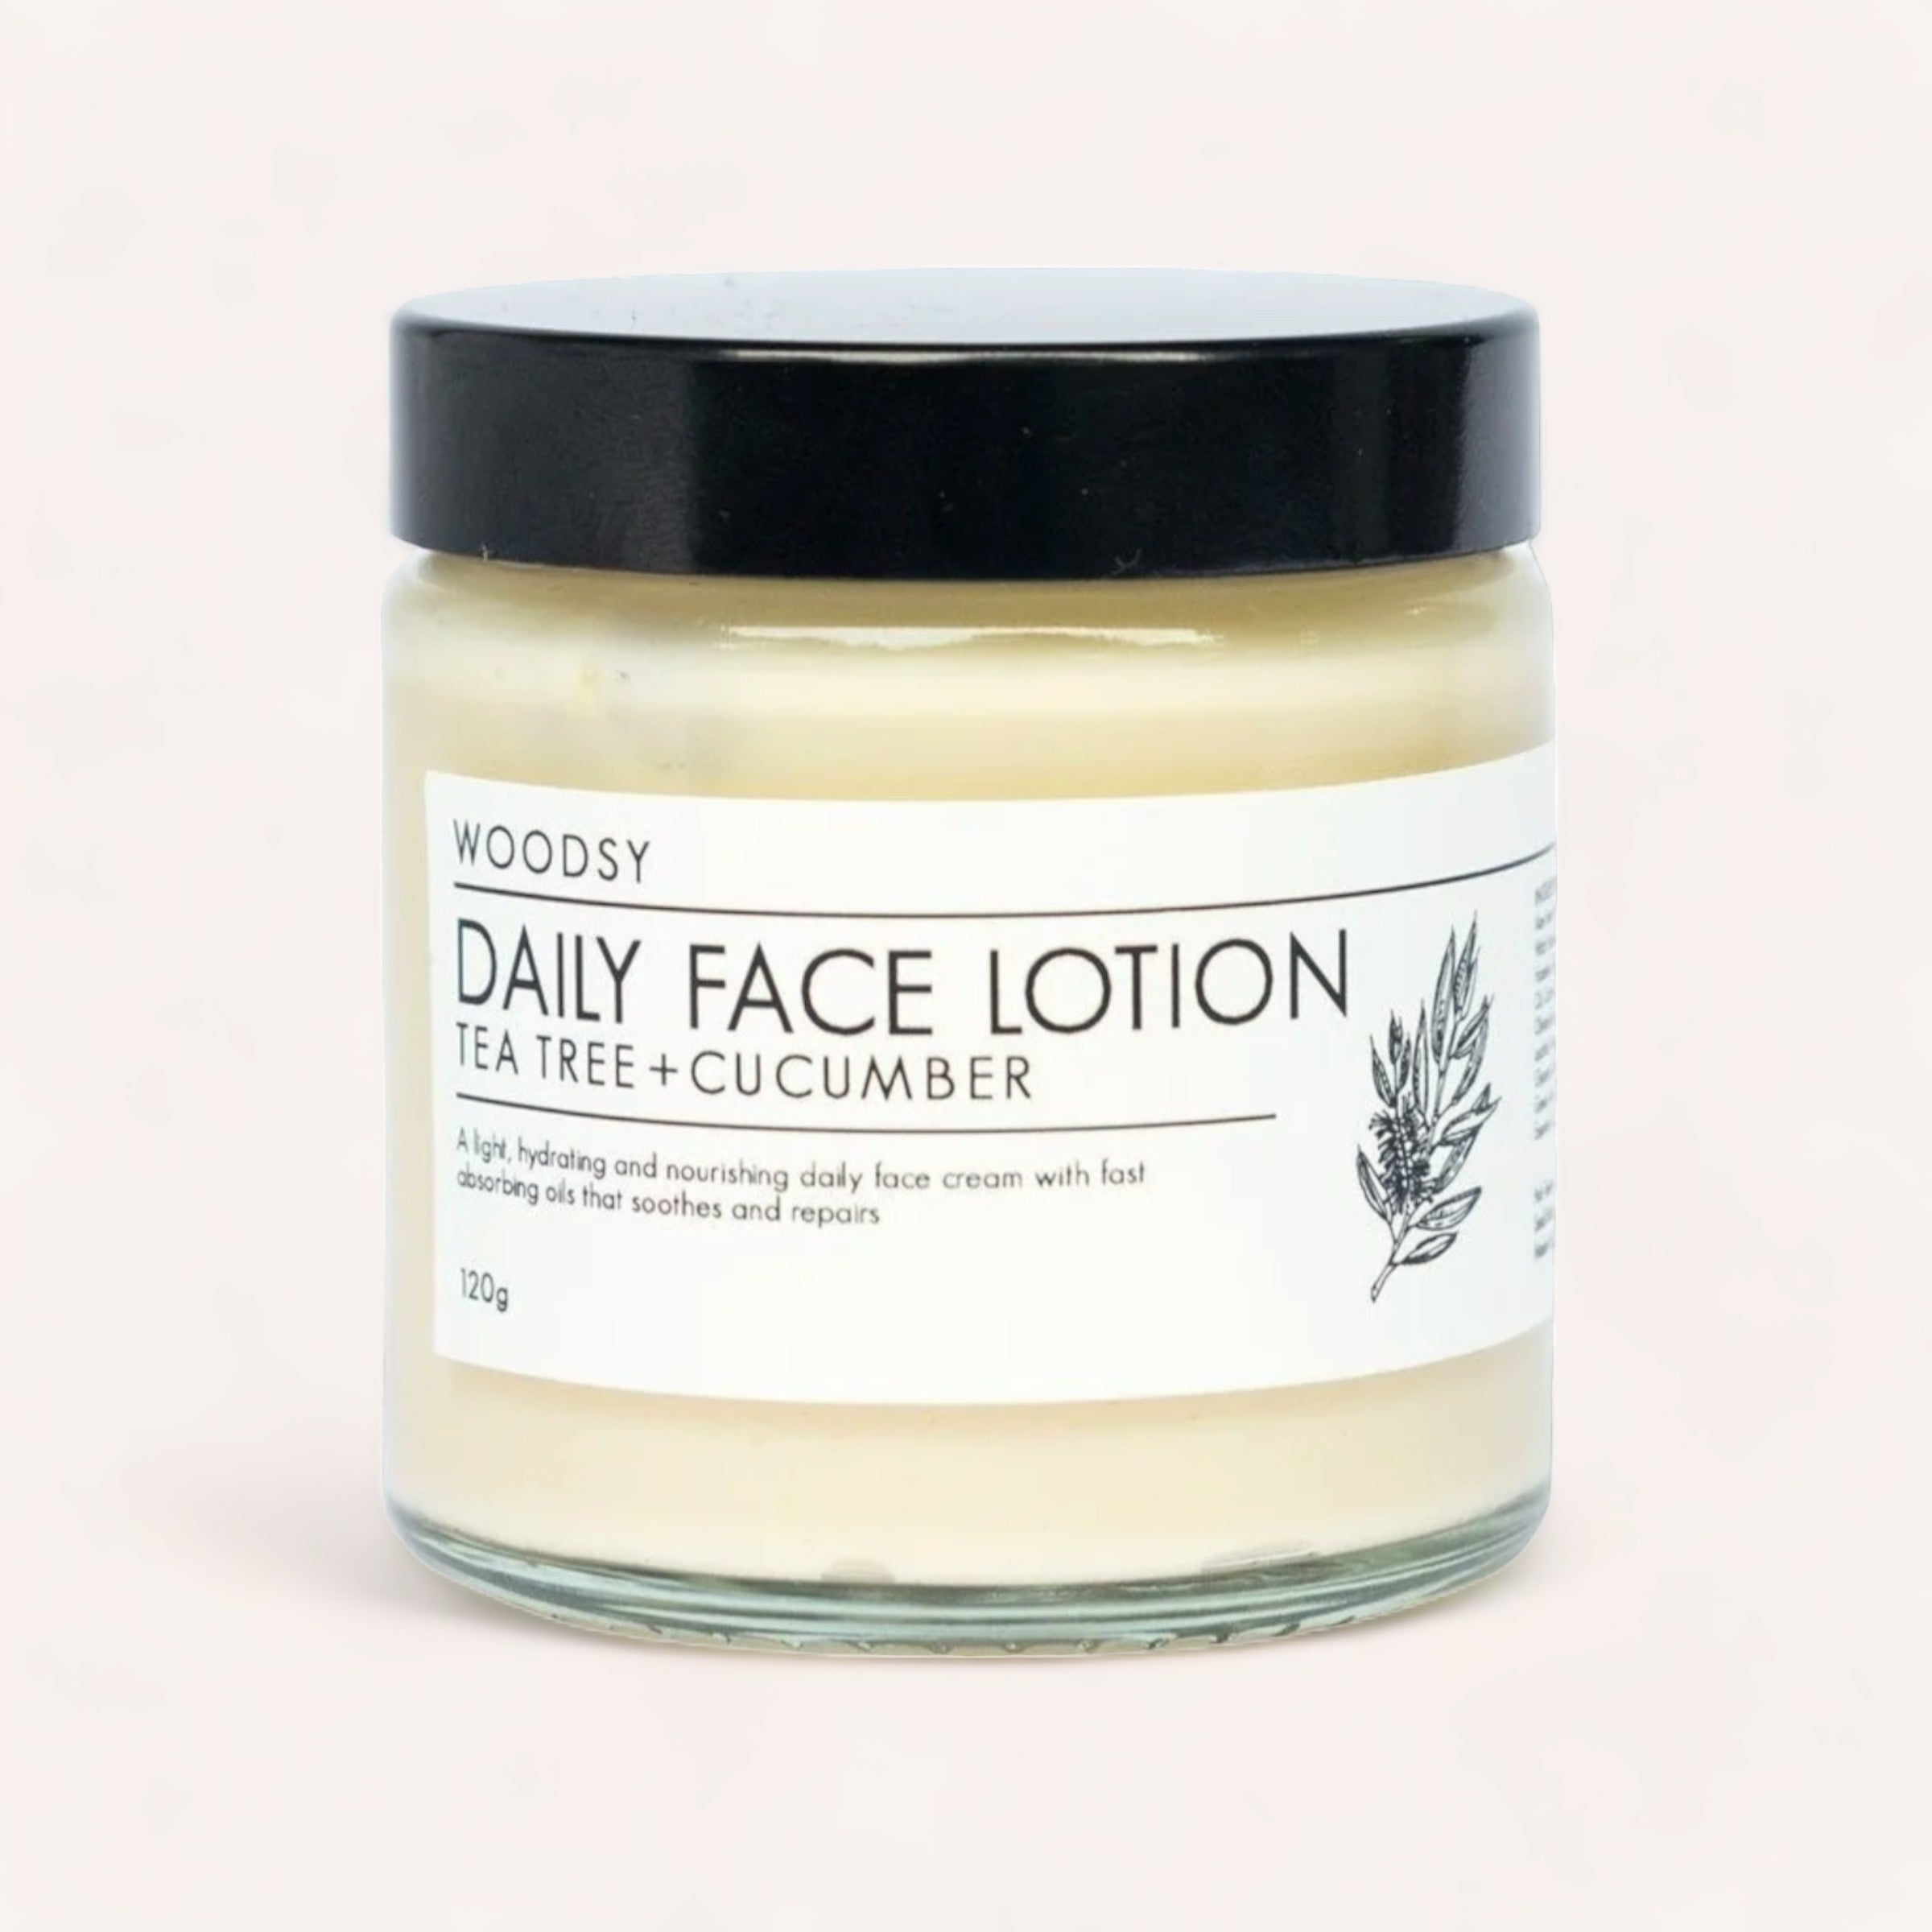 A jar of Daily Face Lotion - Tea Tree & Cucumber by Woodsy Botanics on a plain background.